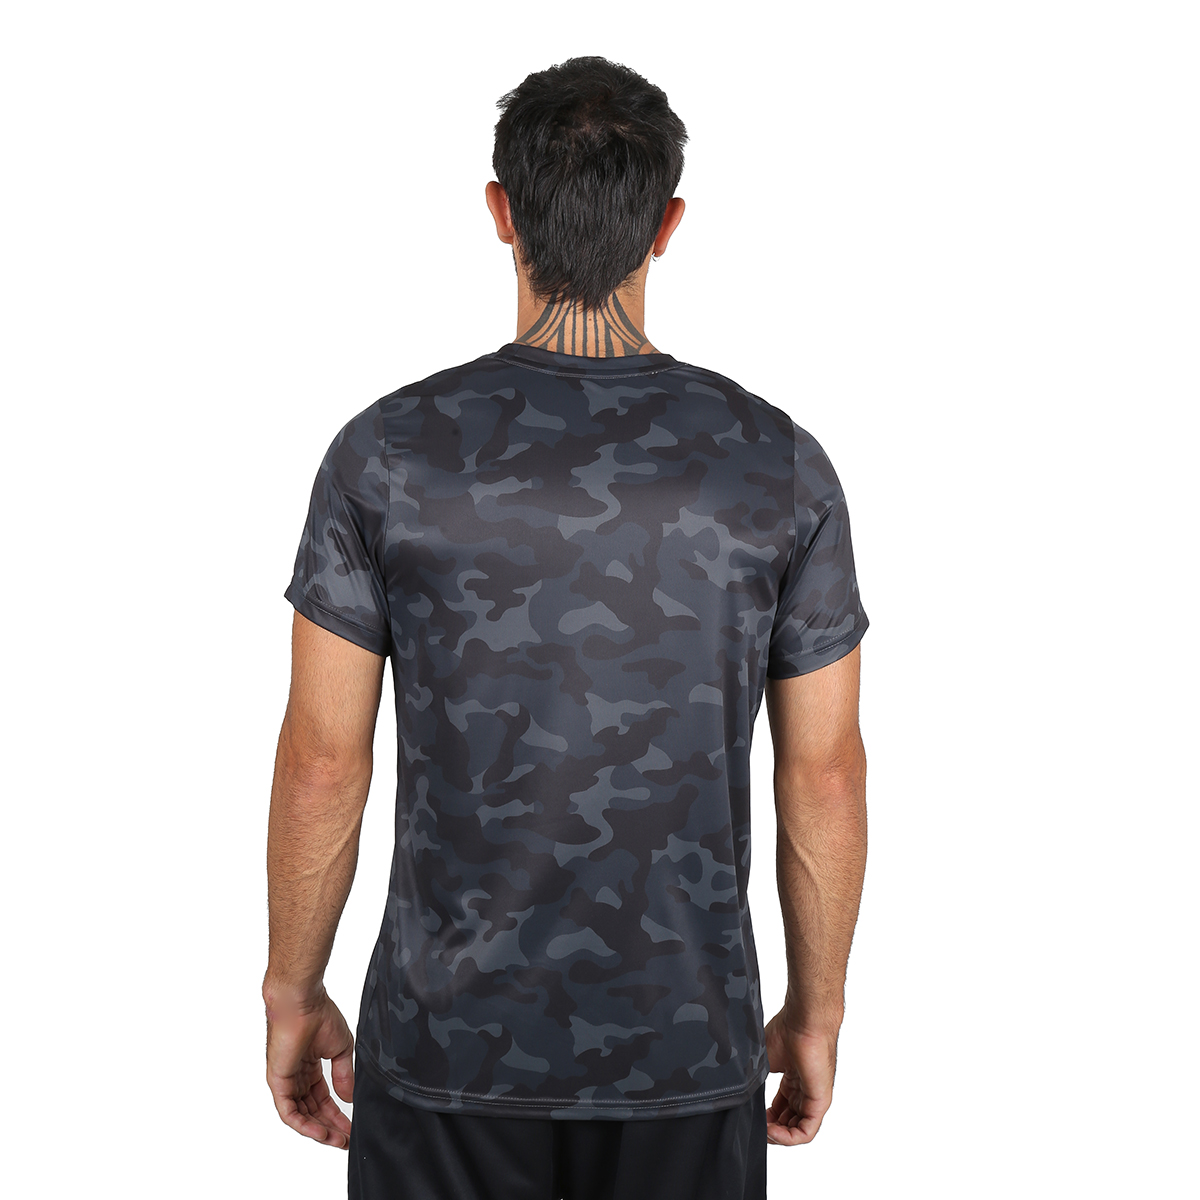 Remera Entrenamiento Topper Full Print Hombre,  image number null